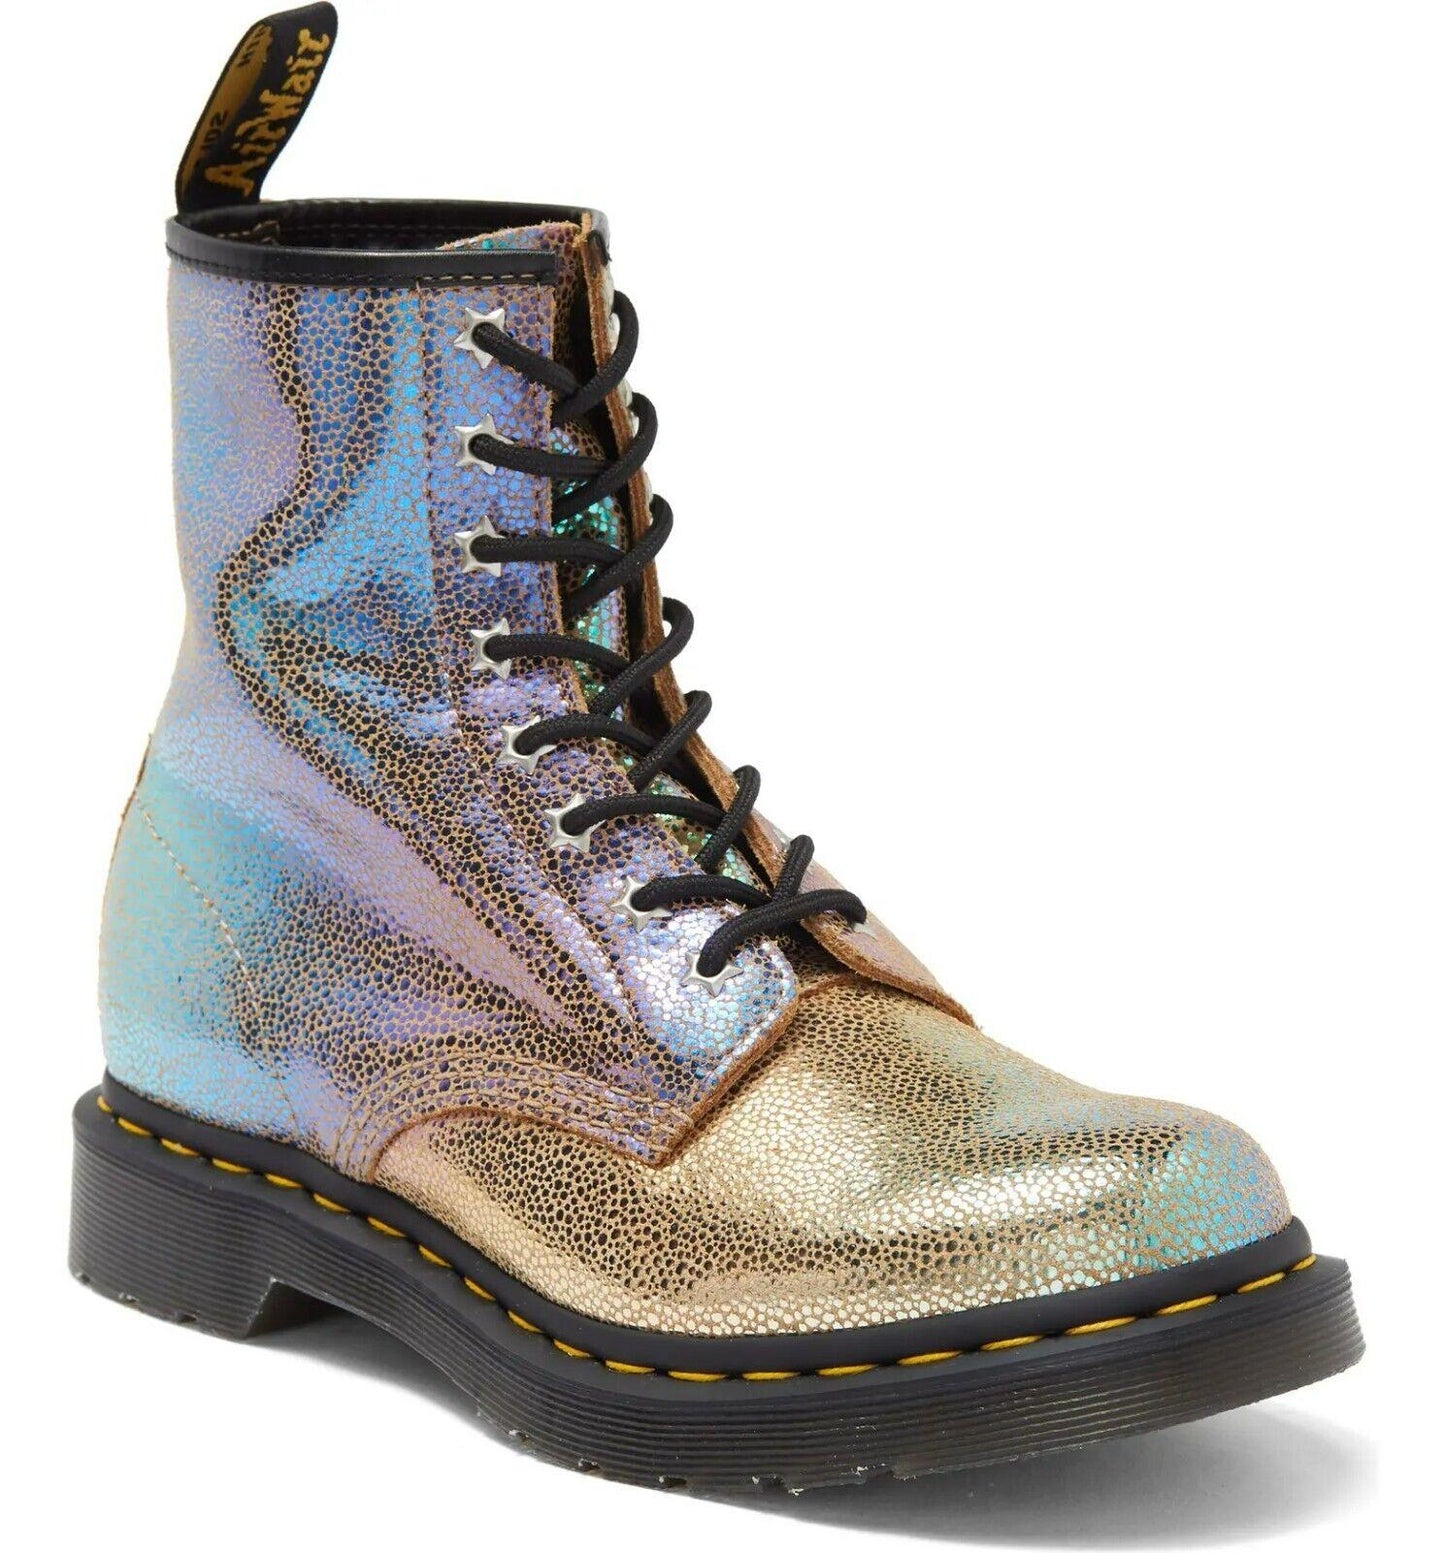 Dr. Martens 1460 Rainbow Ray Leather Lace Up Combat Boots Size US 8 EU 39 - SVNYFancy